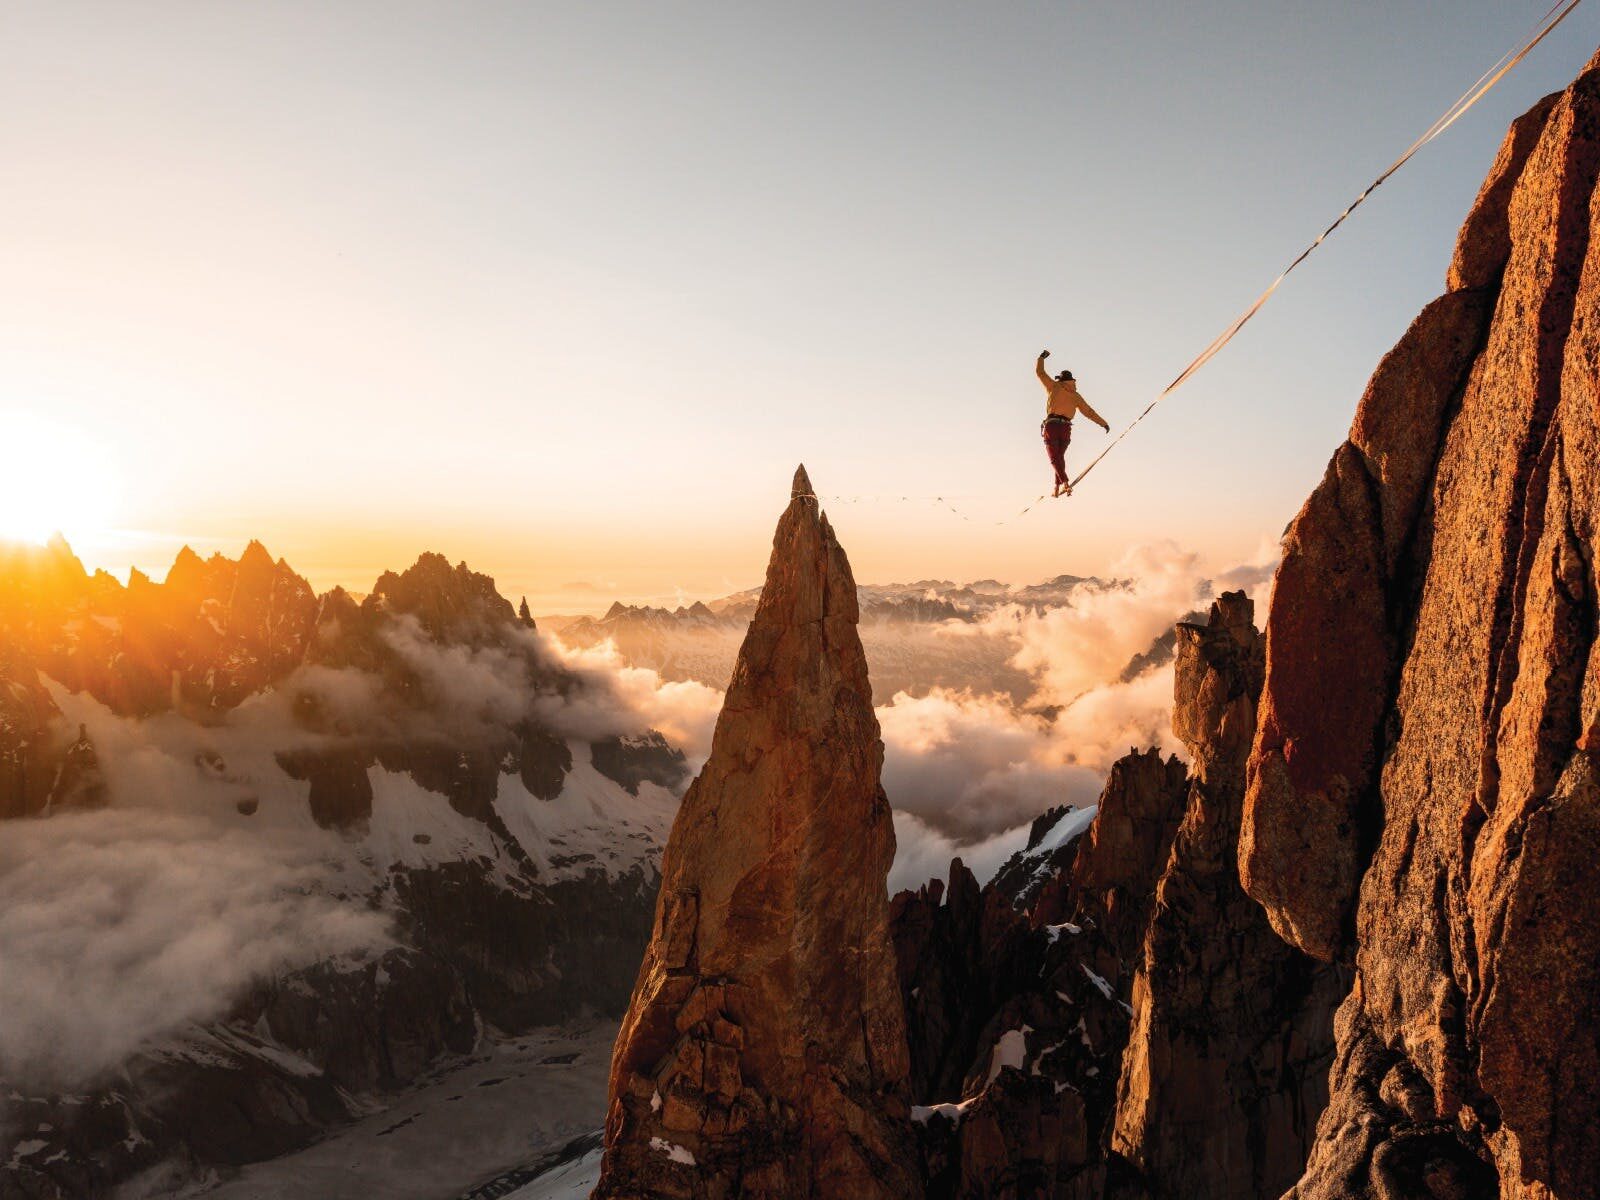 A man balancing on a tightrope in the mountains